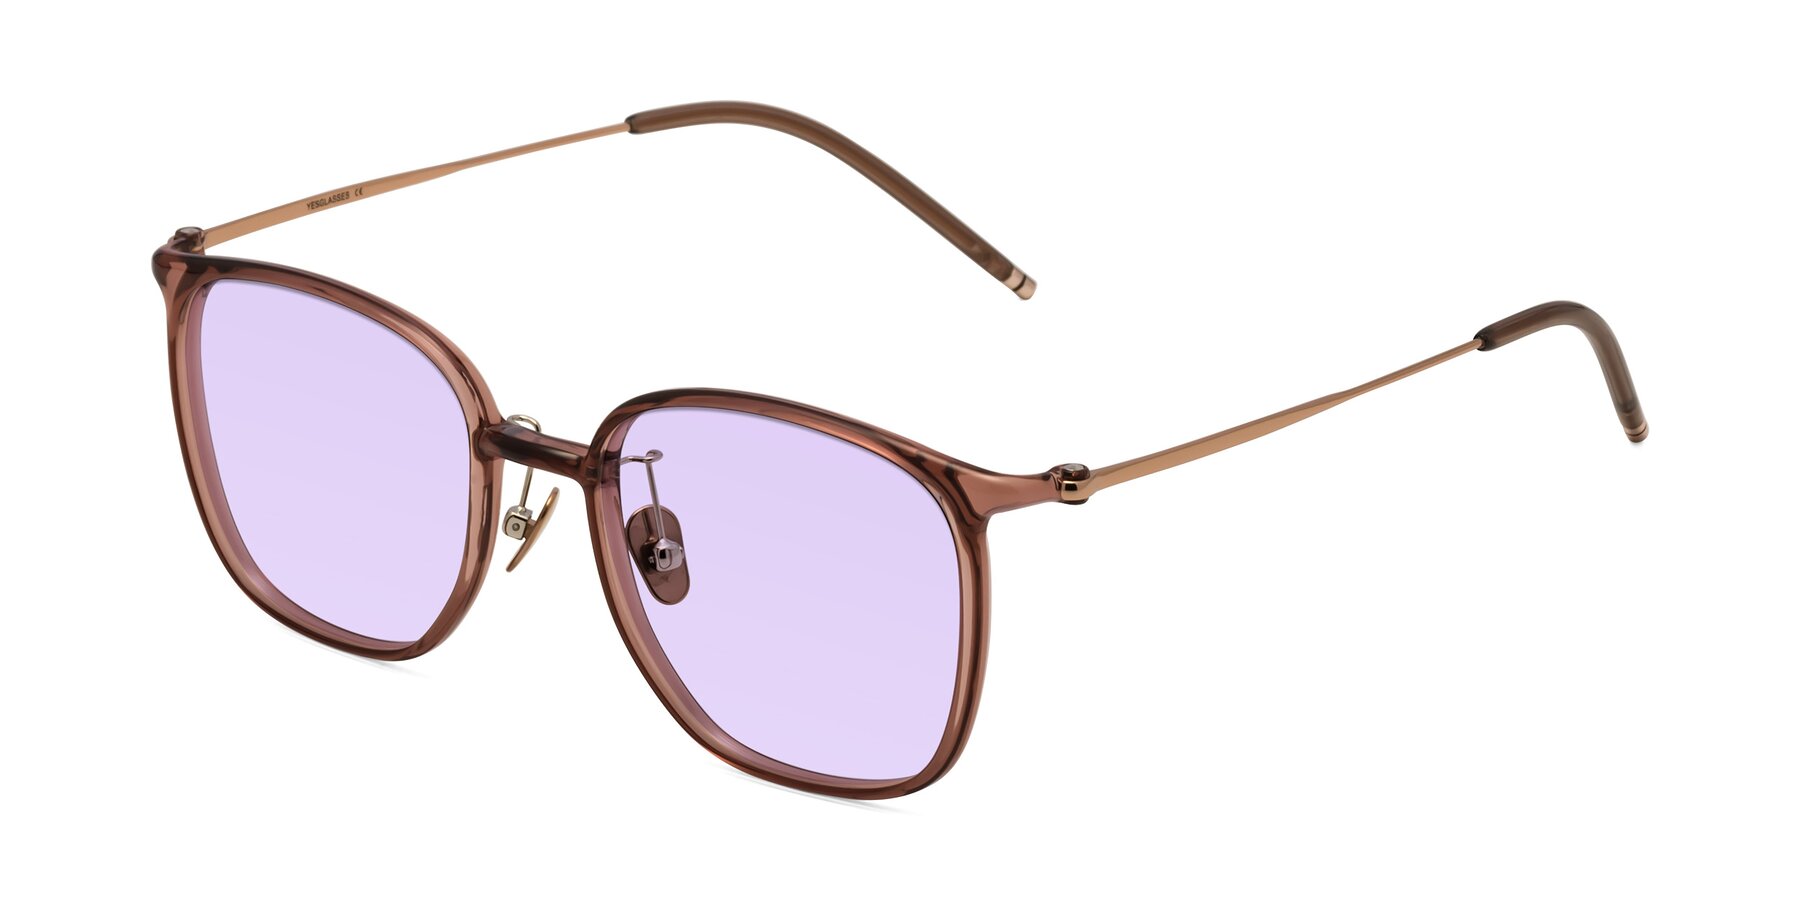 Angle of Manlius in Redwood with Light Purple Tinted Lenses